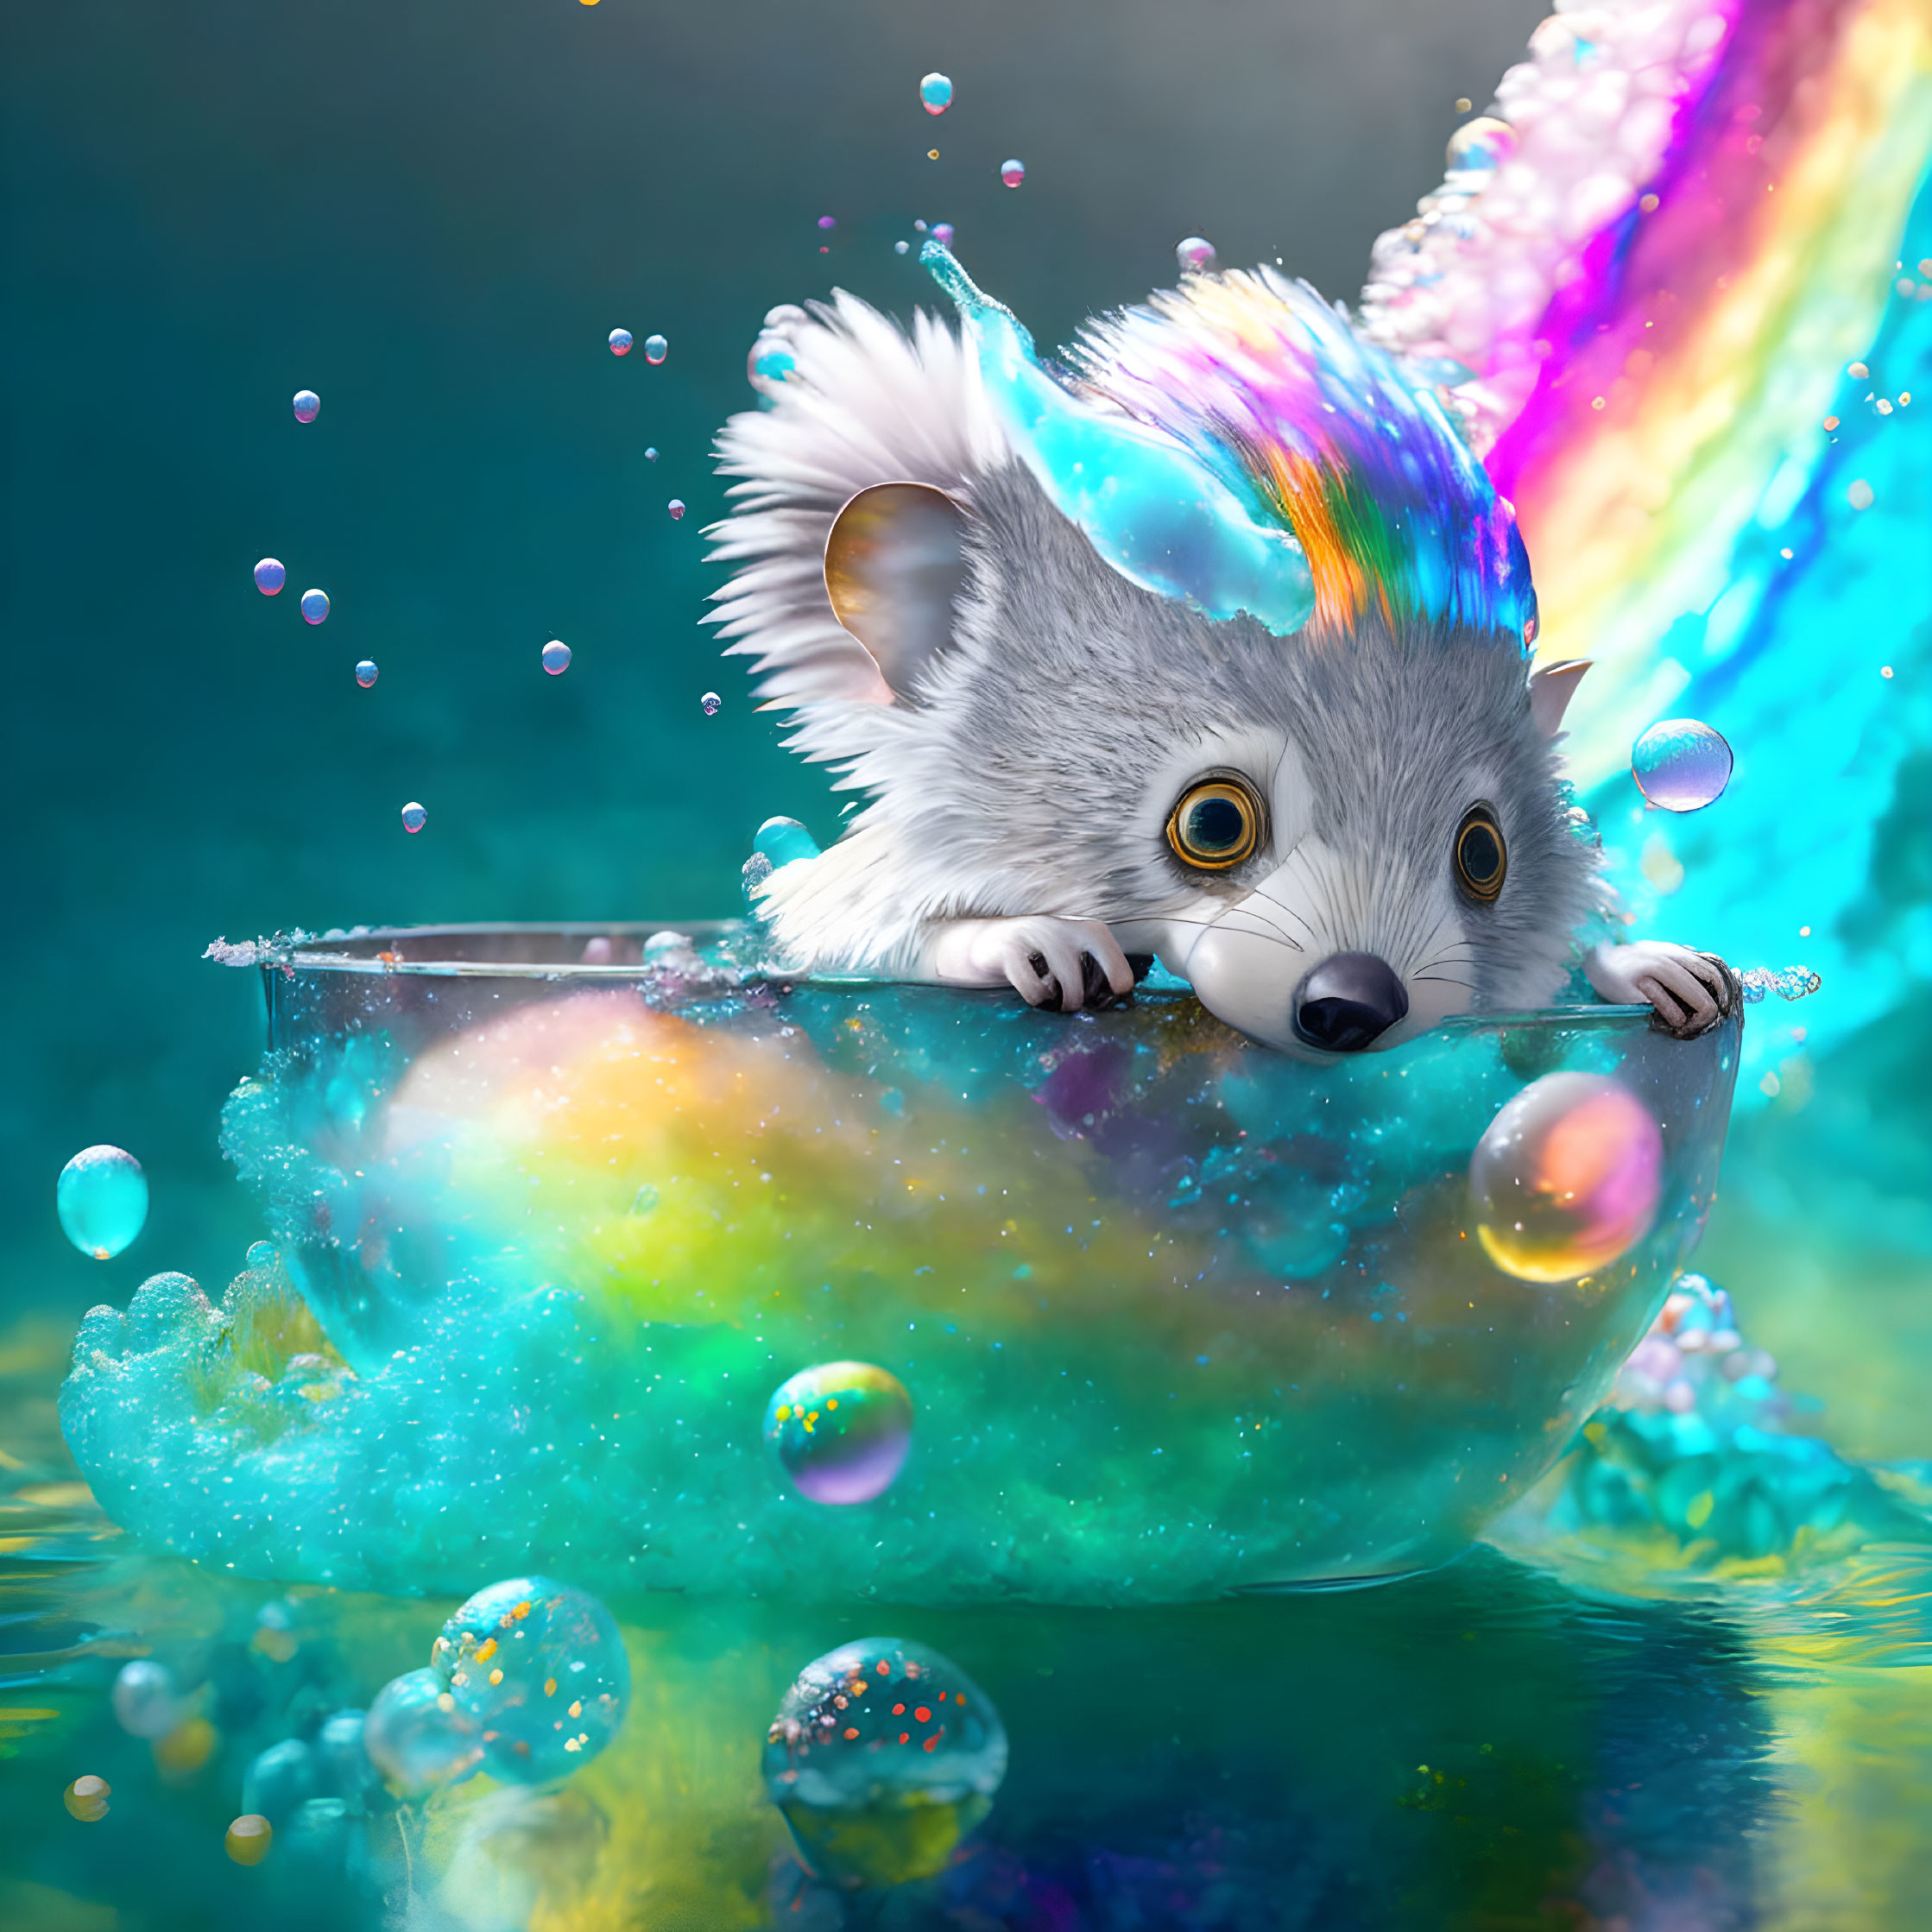 Colorful iridescent possum sliding down rainbow trail in bubble-filled teacup on blue backdrop